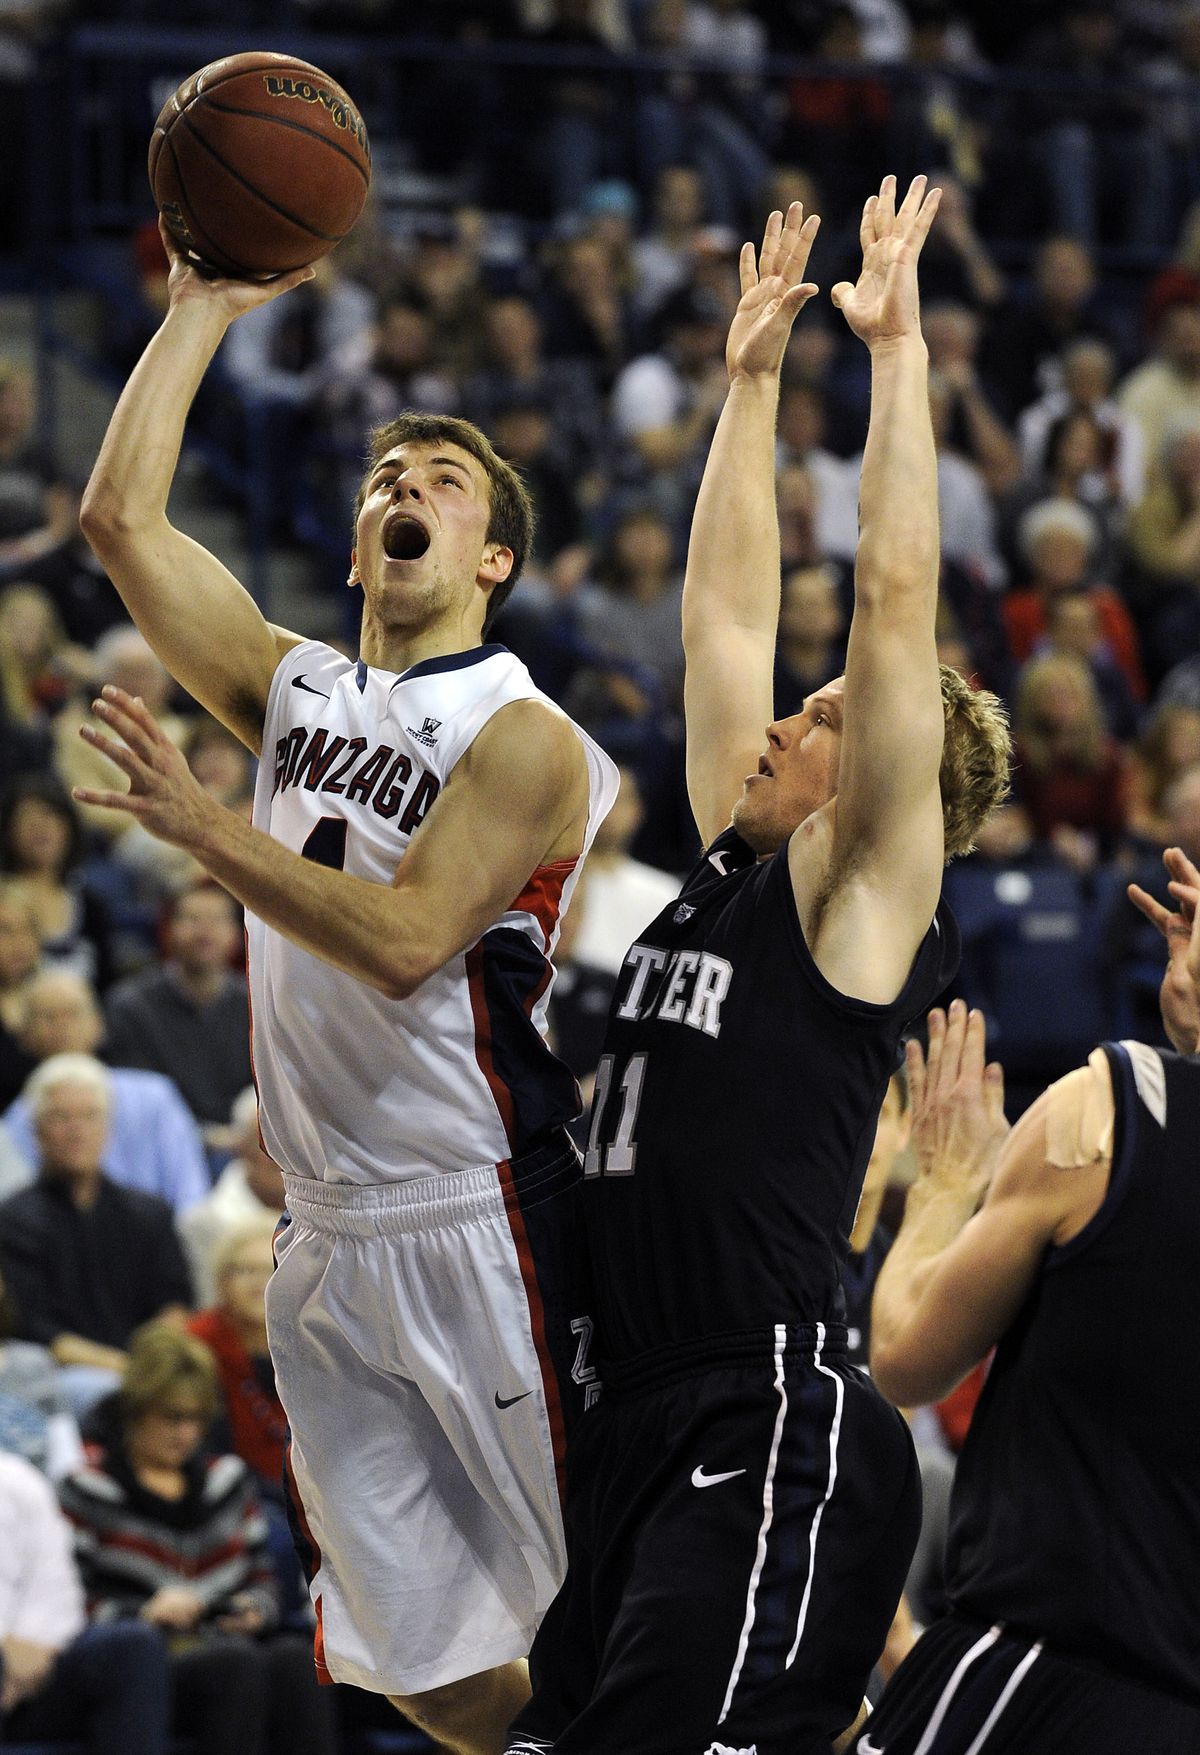 Zags guard Kevin Pangos, left, looks to the basket over Butler’s Jackson Aldridge. Pangos scored 19 points. (Colin Mulvany)